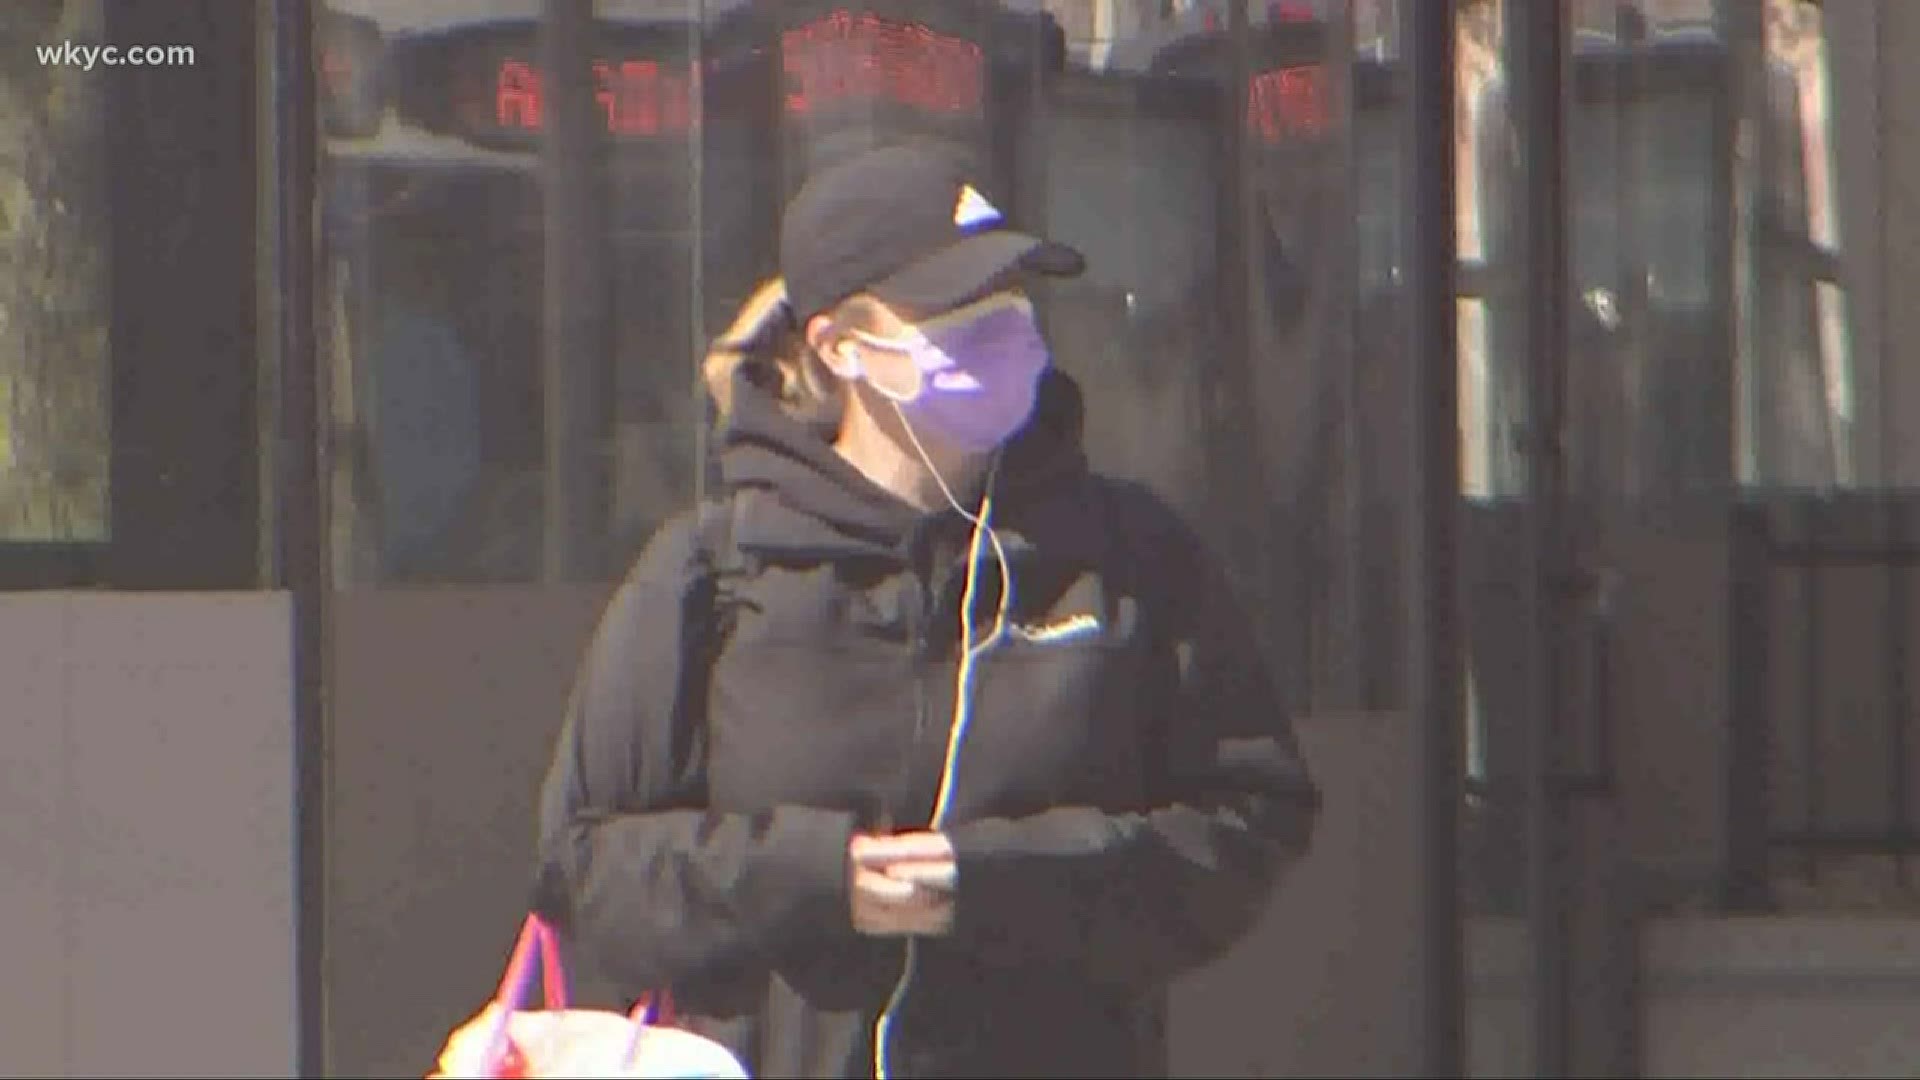 Ohio Department of Health Director Dr. Amy Acton said on Monday that the general public could still be wearing masks for the next year. Laura Caso has the details.